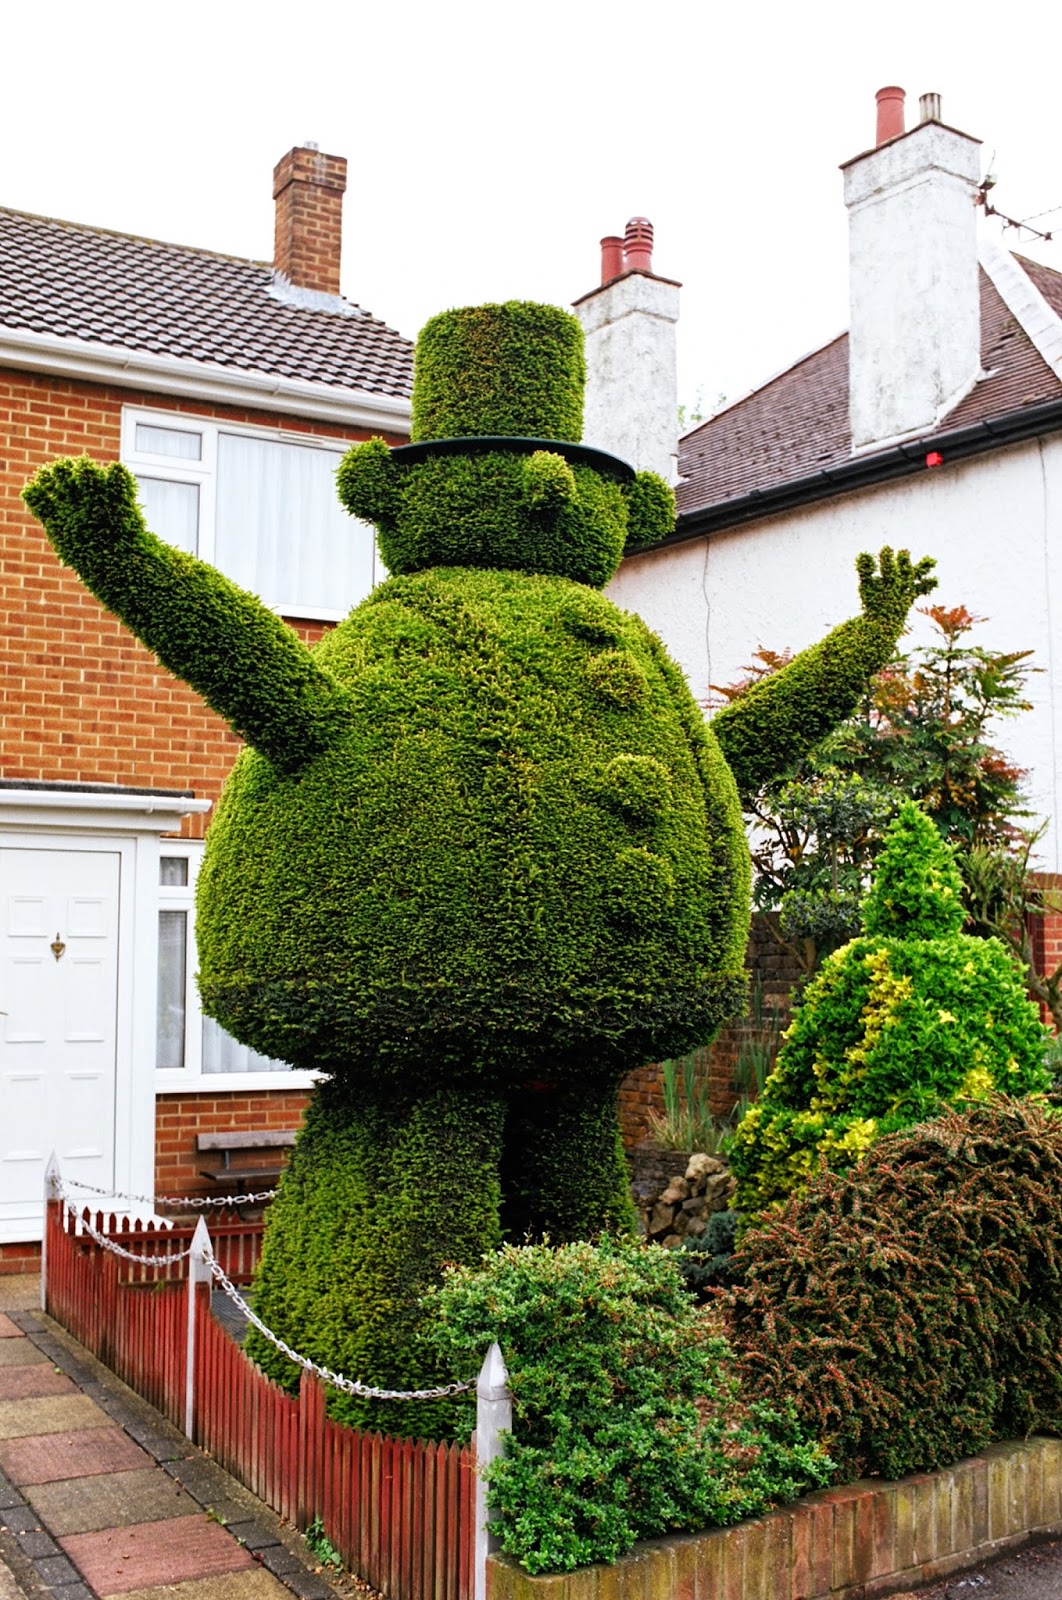 BROADSTAIRS, KENT, SOUTH THANET, UKIP, TOPIARY, TOPIARY MAN, TOPIARY FIGURE, FOLK ART, GARDENING, GREEN FINGERS, HEDGES2015 GENERAL ELECTION, 100 DAYS 4 MILLION CONVERSATIONS, © VAC